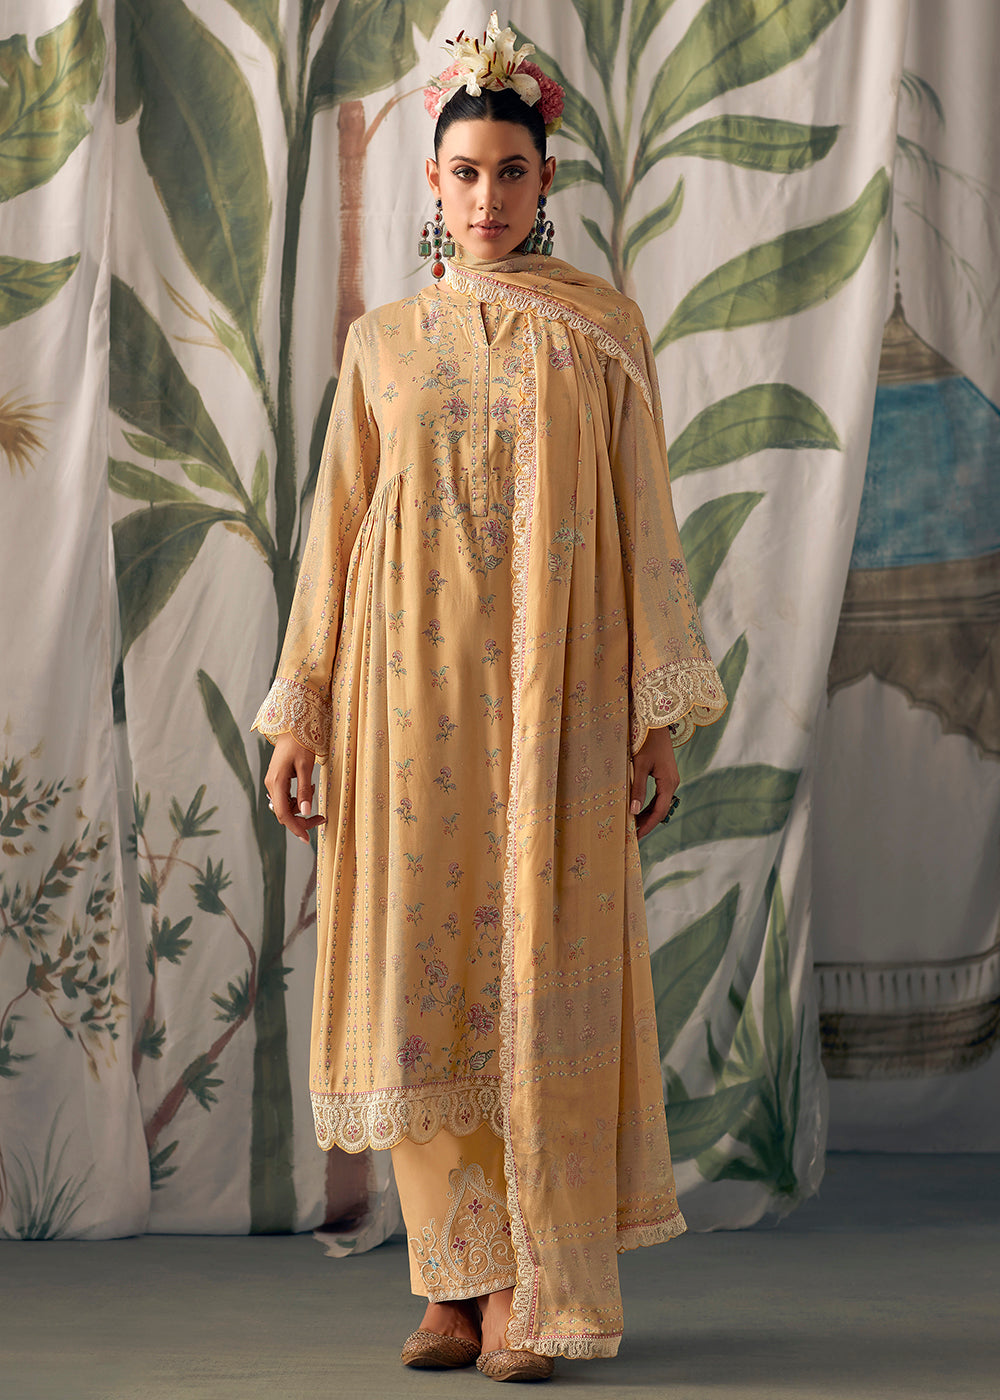 Buy Now Yellow Pure Maslin Cotton Digital Printed Salwar Suit Online in USA, UK, Canada, Germany, Australia & Worldwide at Empress Clothing.